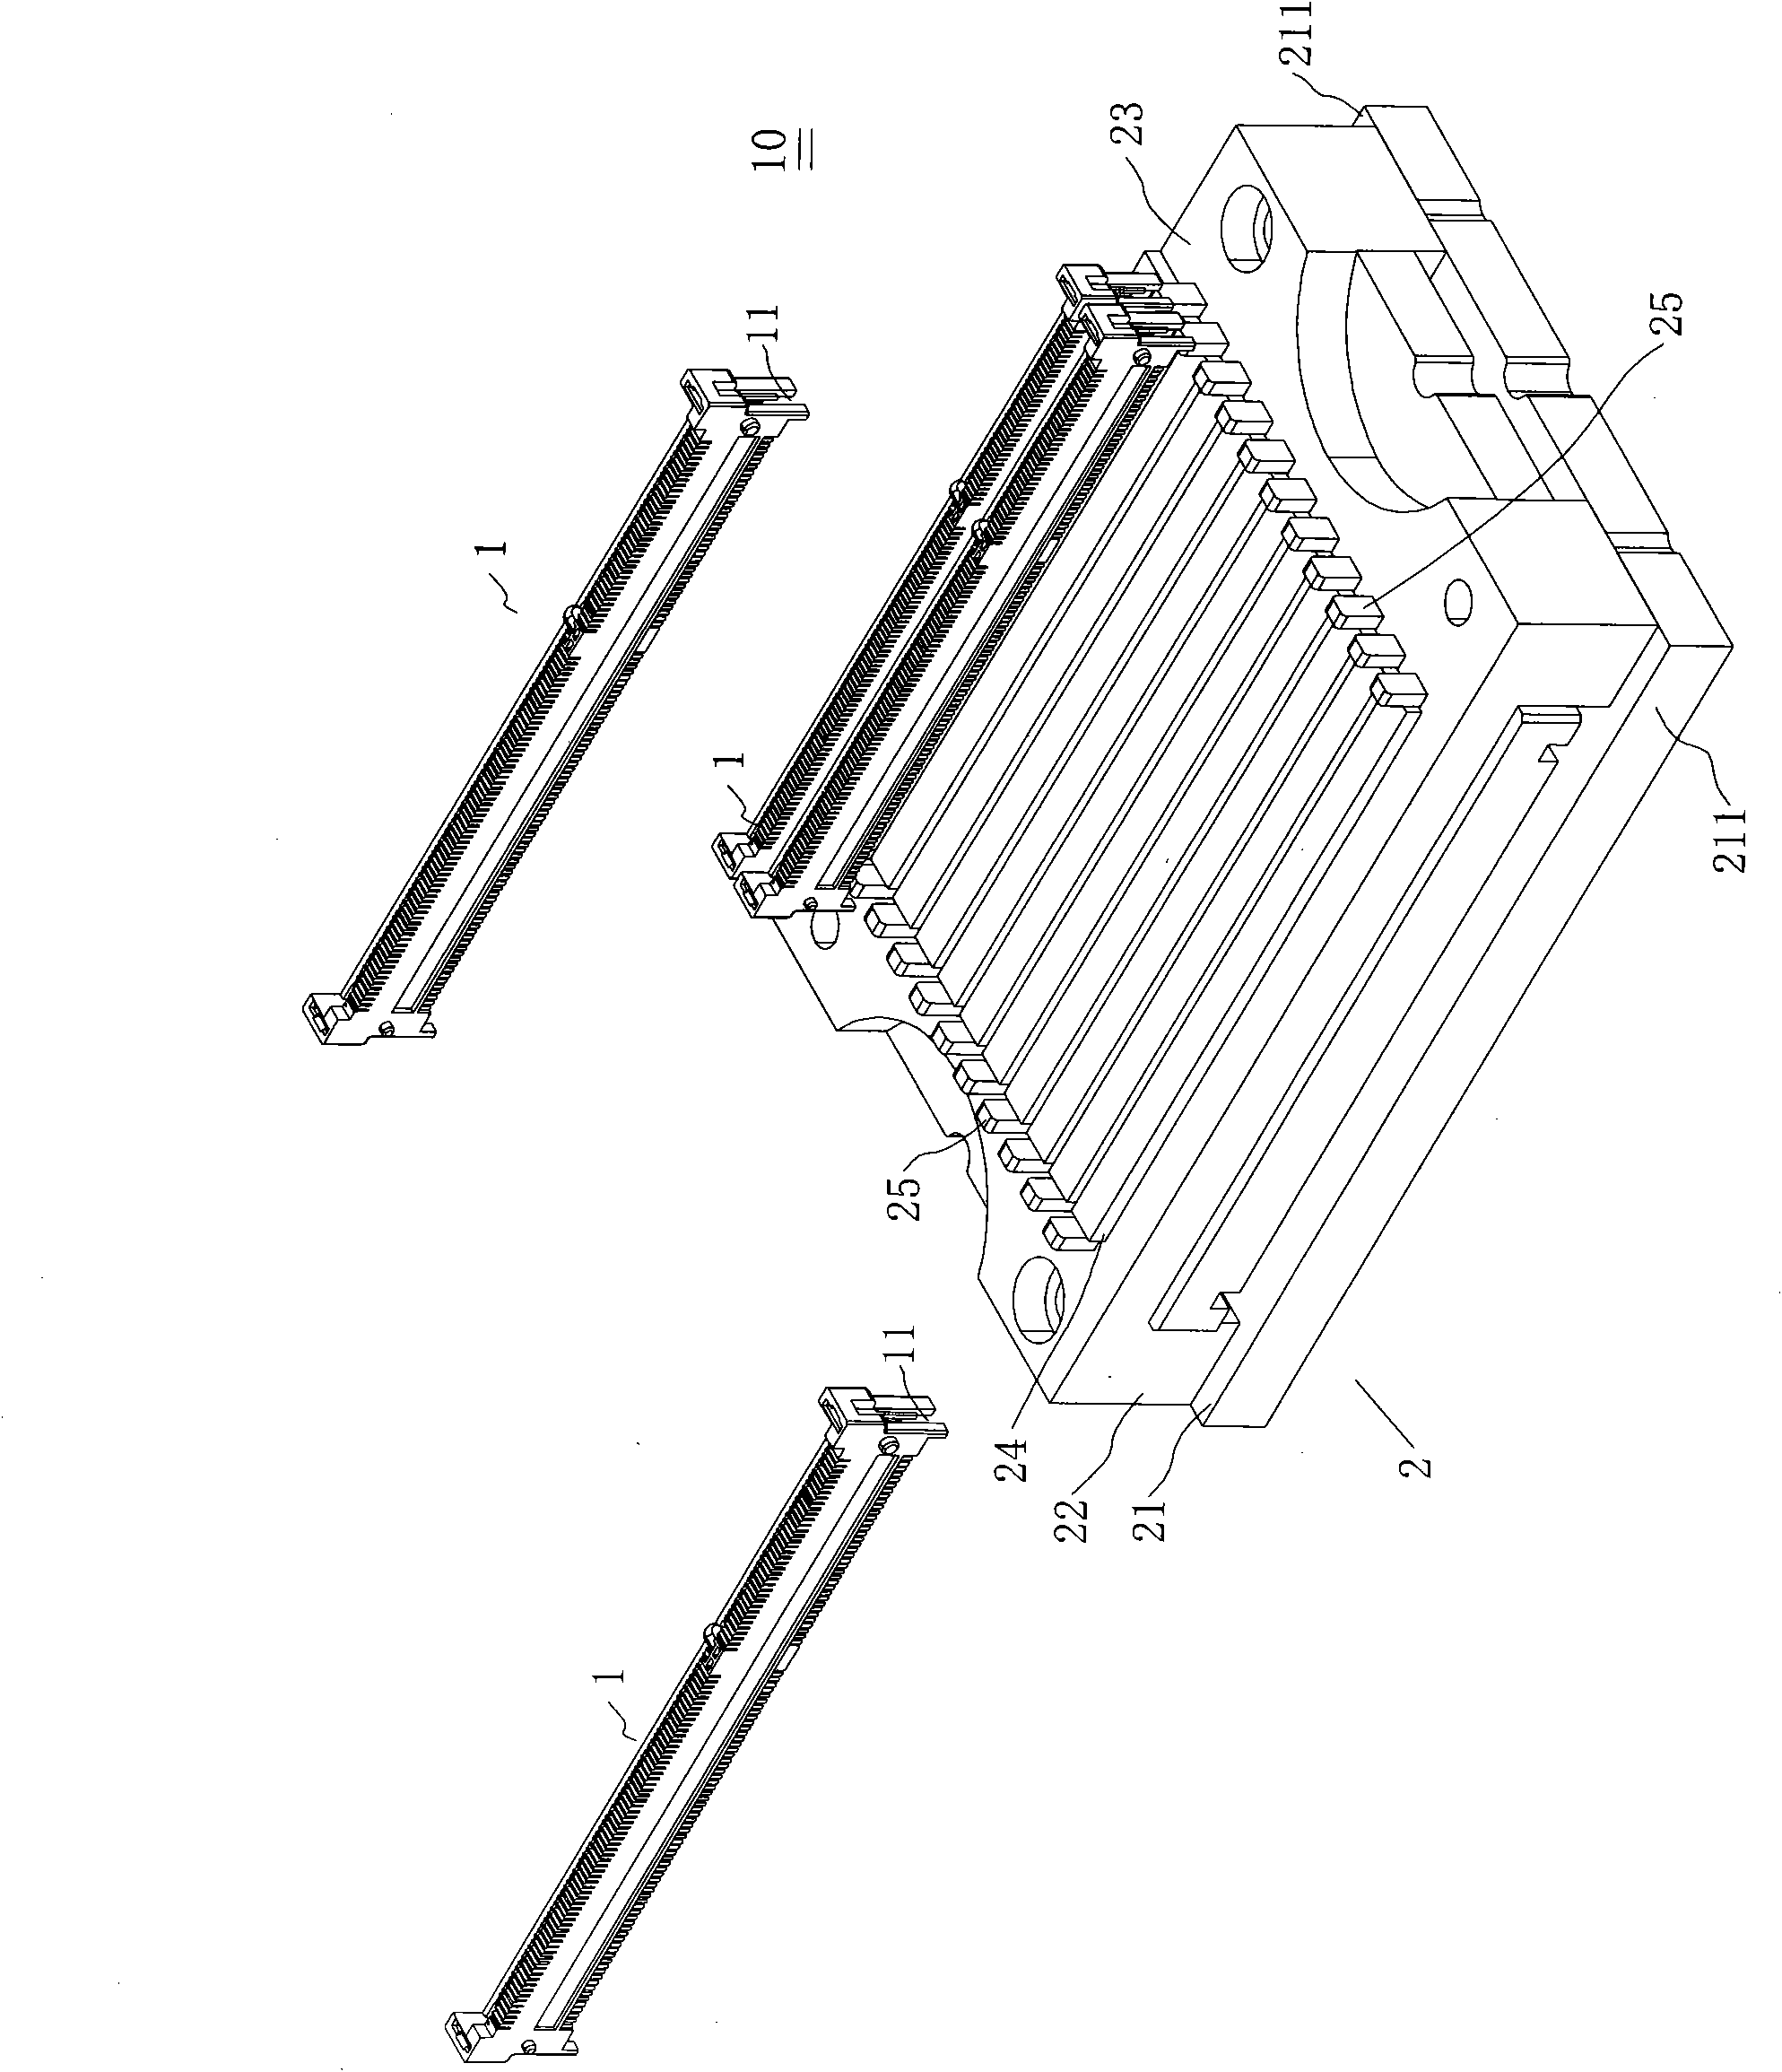 Automatic production and assembly method of internal memory connector